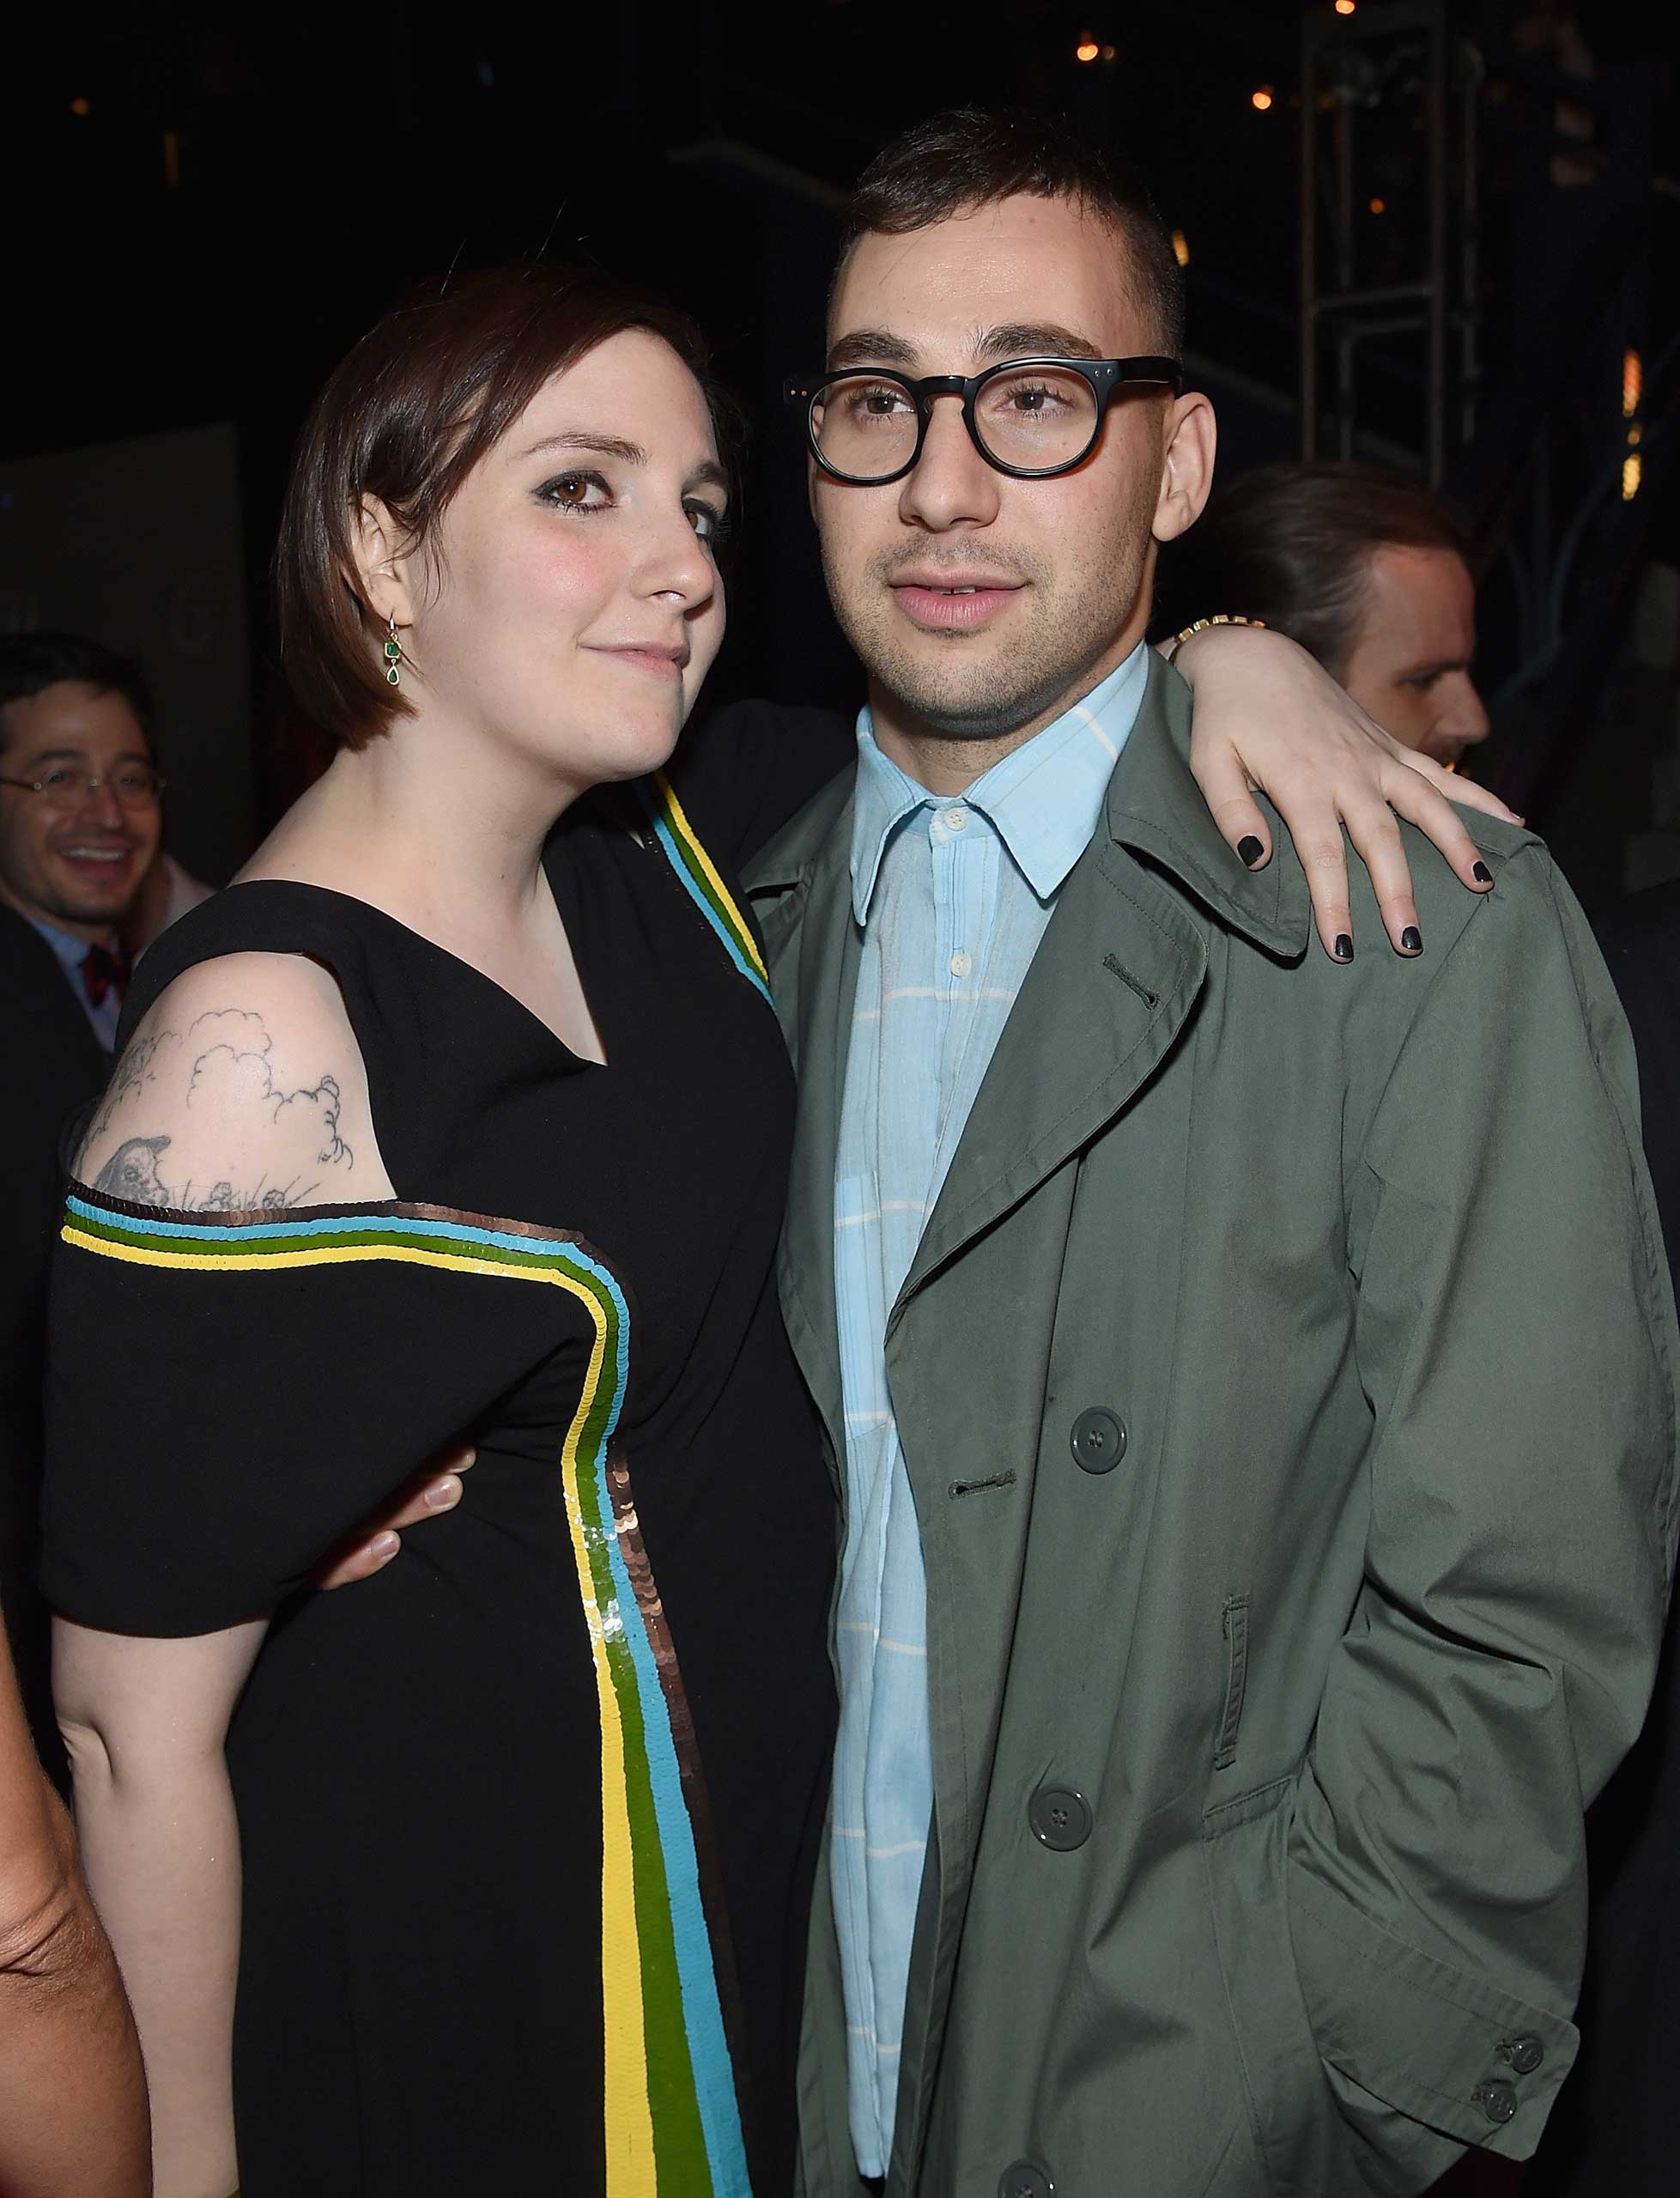 Lena Dunham and Jack Antonoff  attend the "Girls" season four series premiere after party at The Museum of Natural History in New York City on Jan. 5, 2015. (Jamie McCarthy—Getty Images)